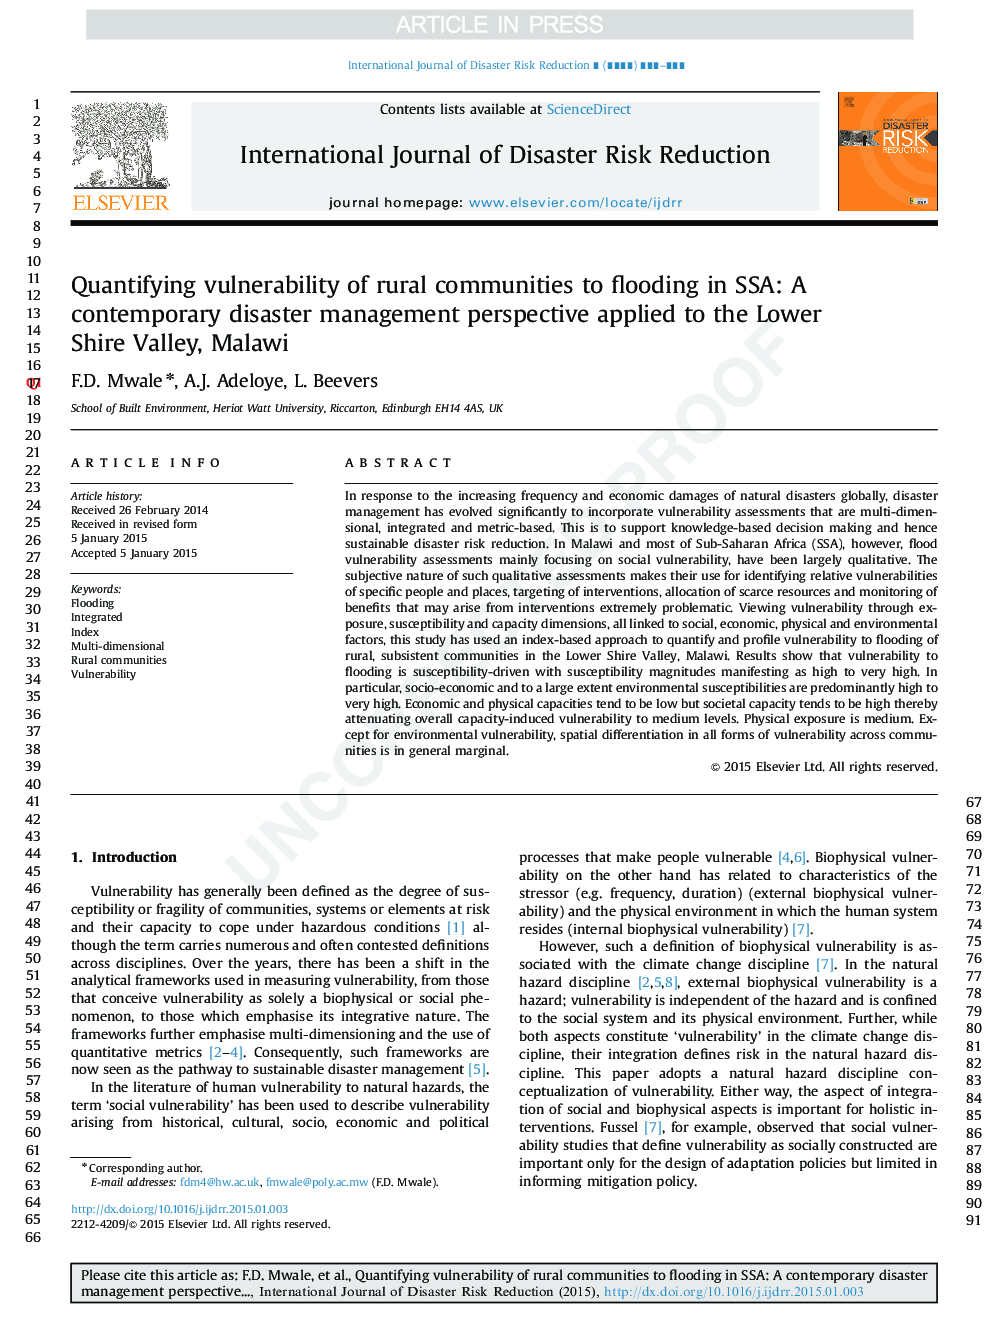 Quantifying vulnerability of rural communities to flooding in SSA: A contemporary disaster management perspective applied to the Lower Shire Valley, Malawi